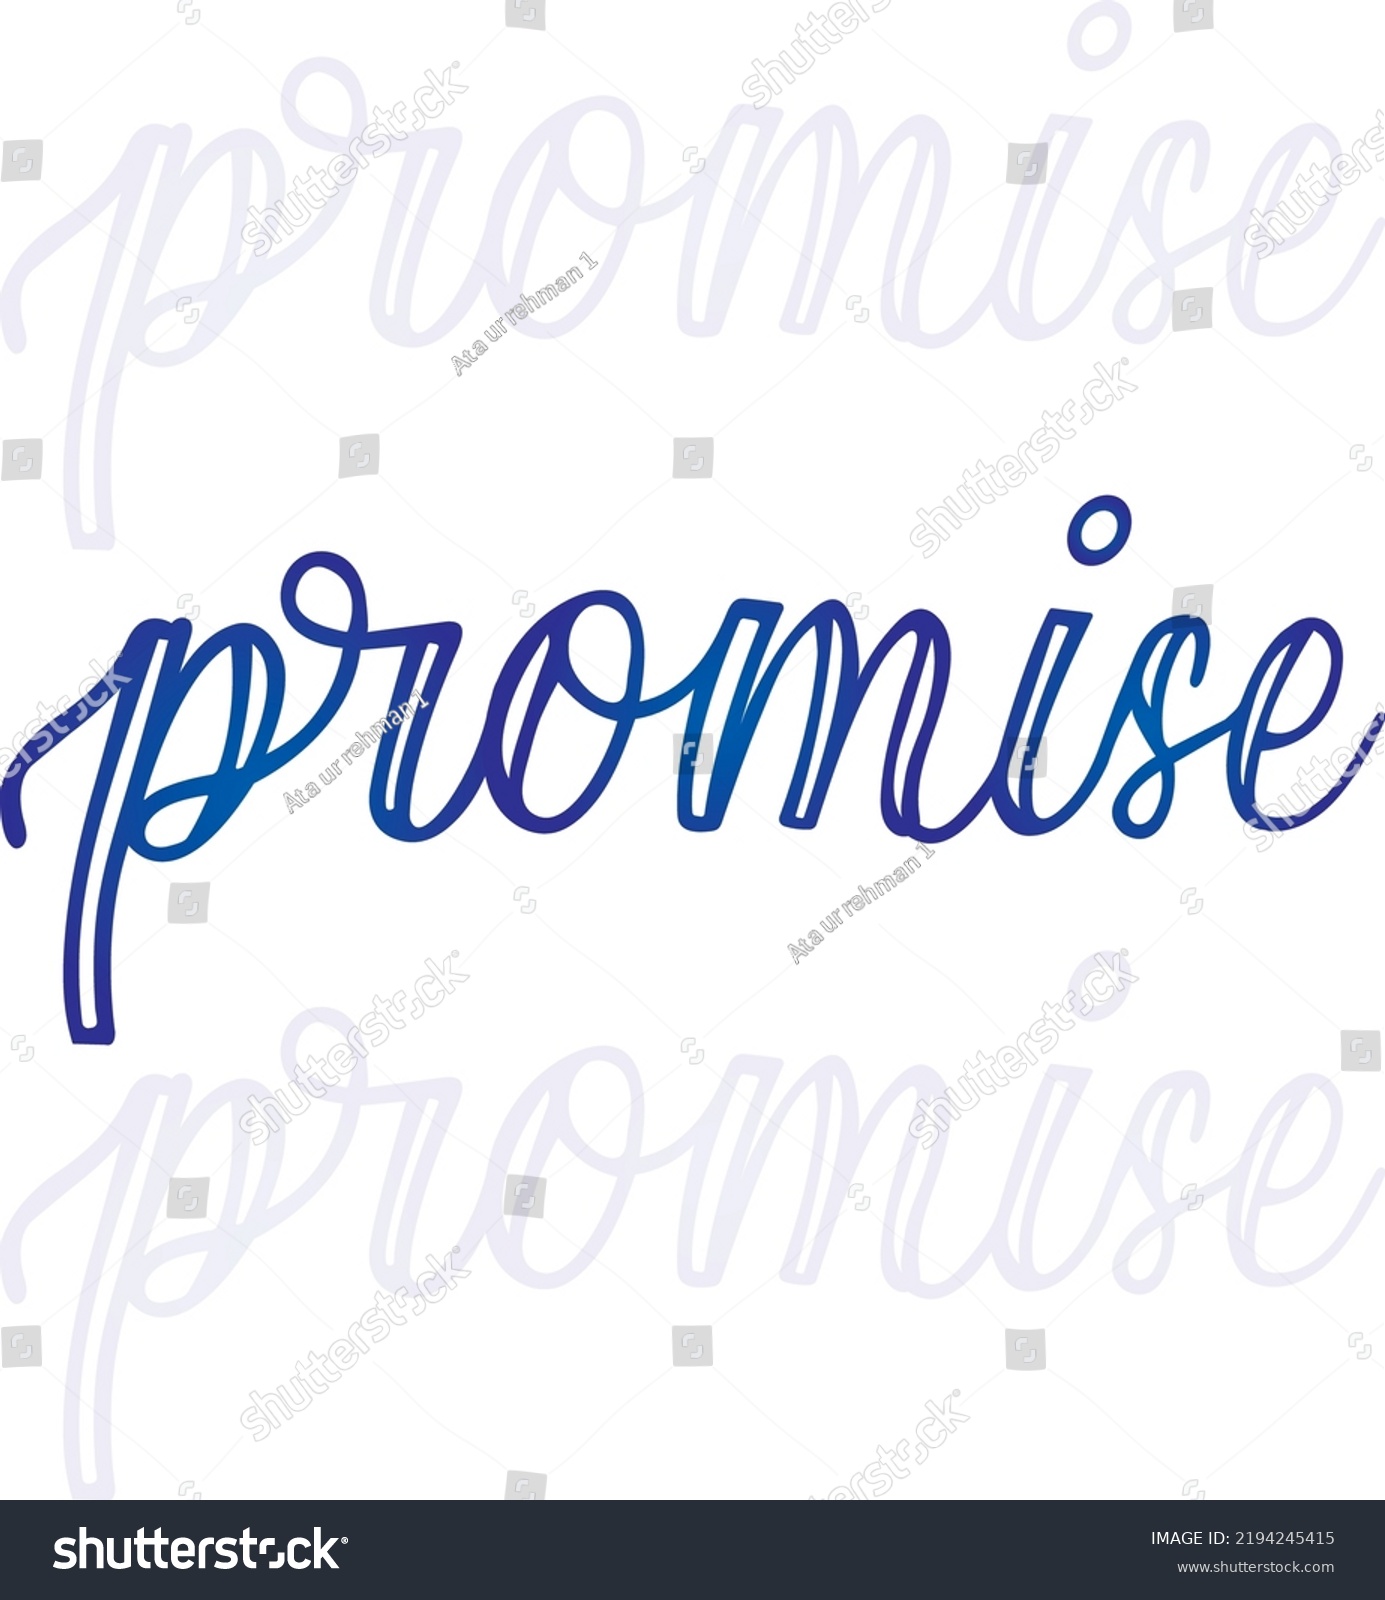 Promise Calligraphy Poster Design Vector Stock Vector (Royalty Free ...